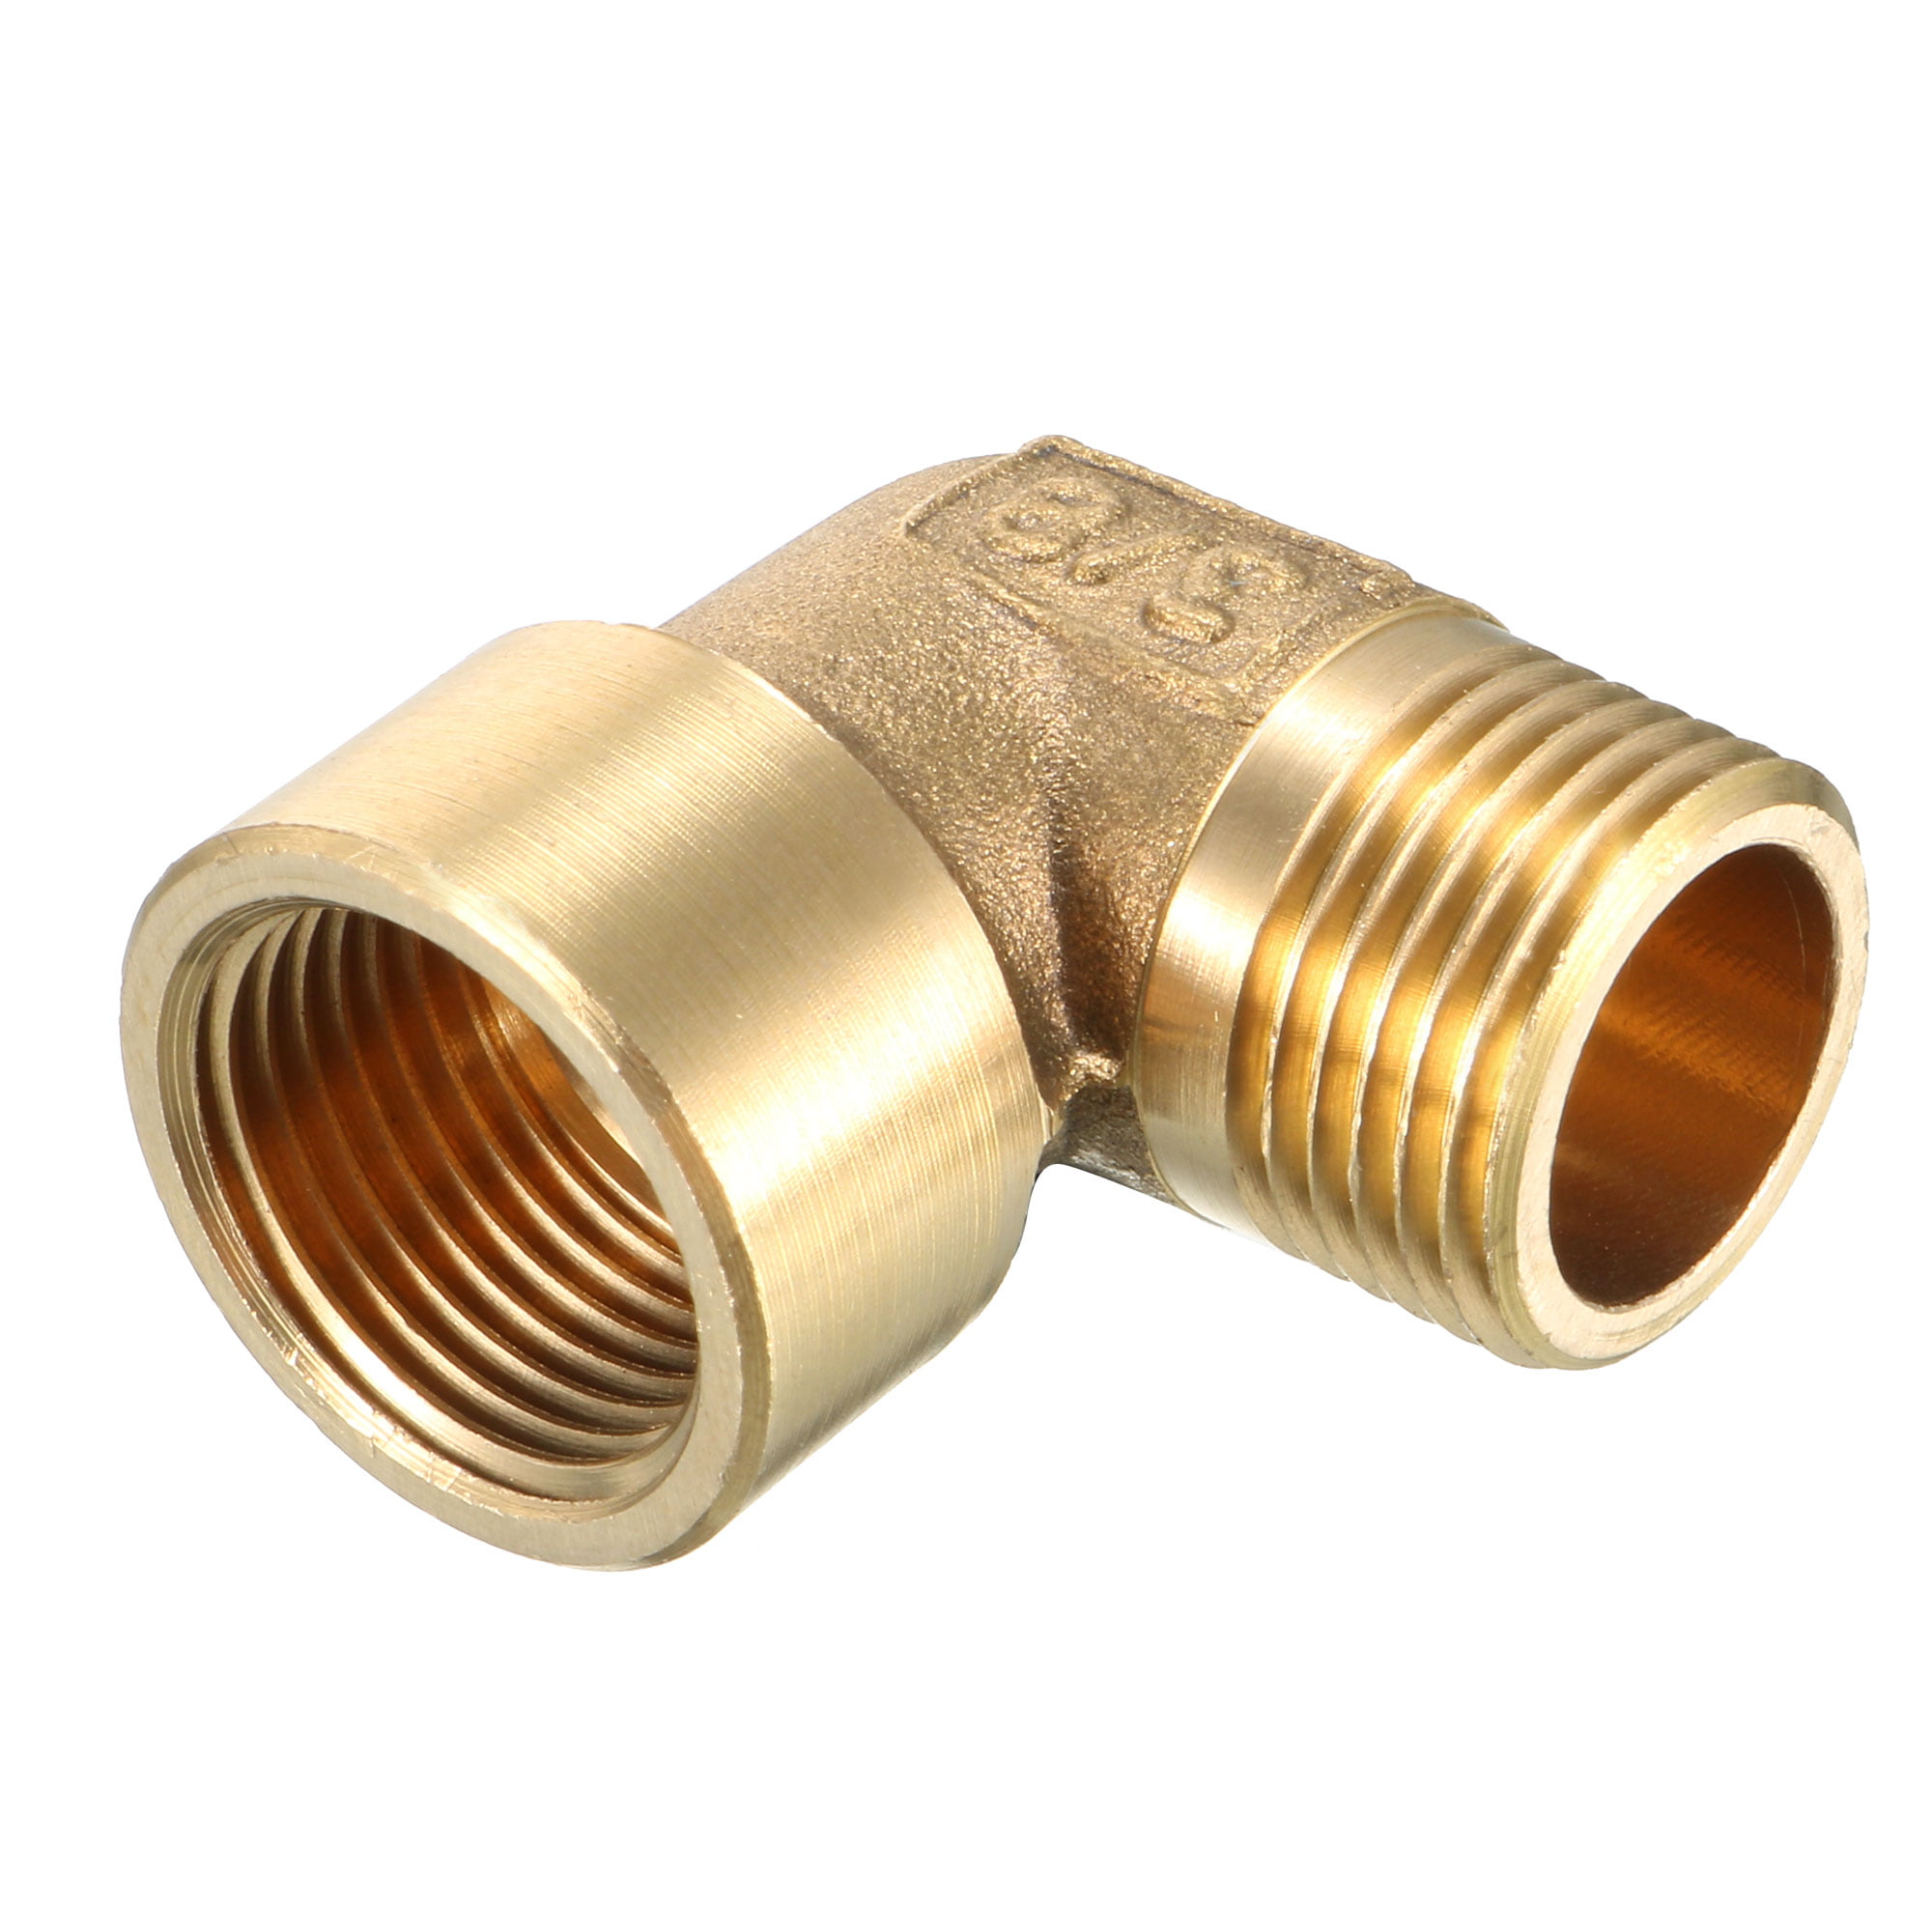 Brass Tone 90 Degree Elbow 3/8 PT Male to 3/8 PT Female Pipe Fitting Coupler 